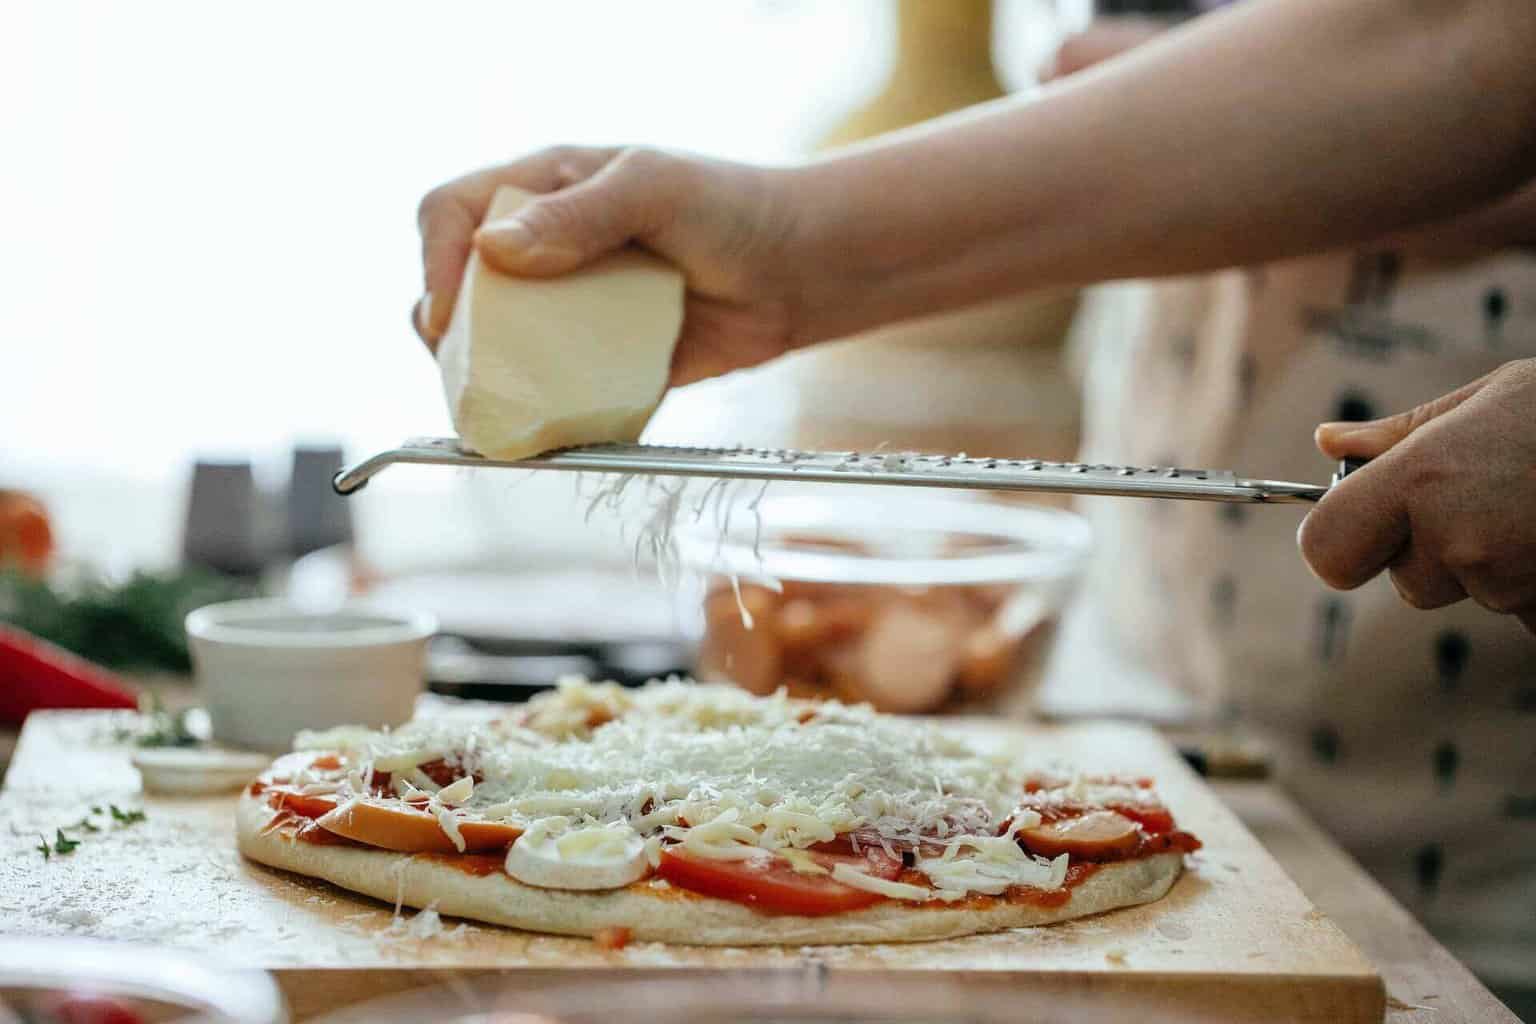 Person grating cheese on a pizza